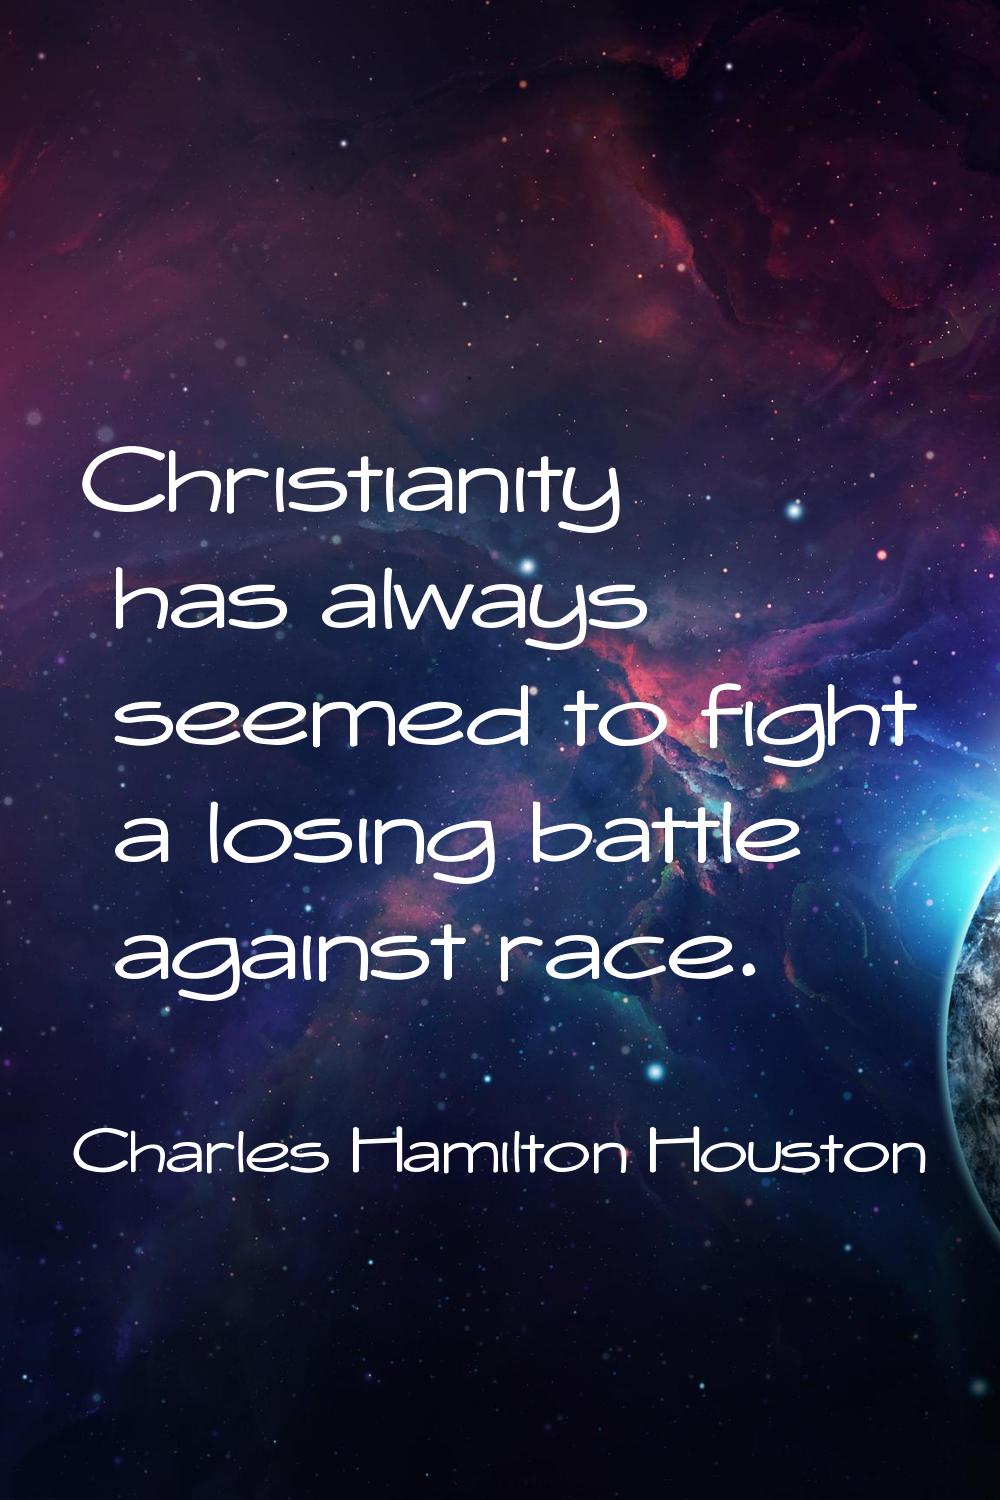 Christianity has always seemed to fight a losing battle against race.